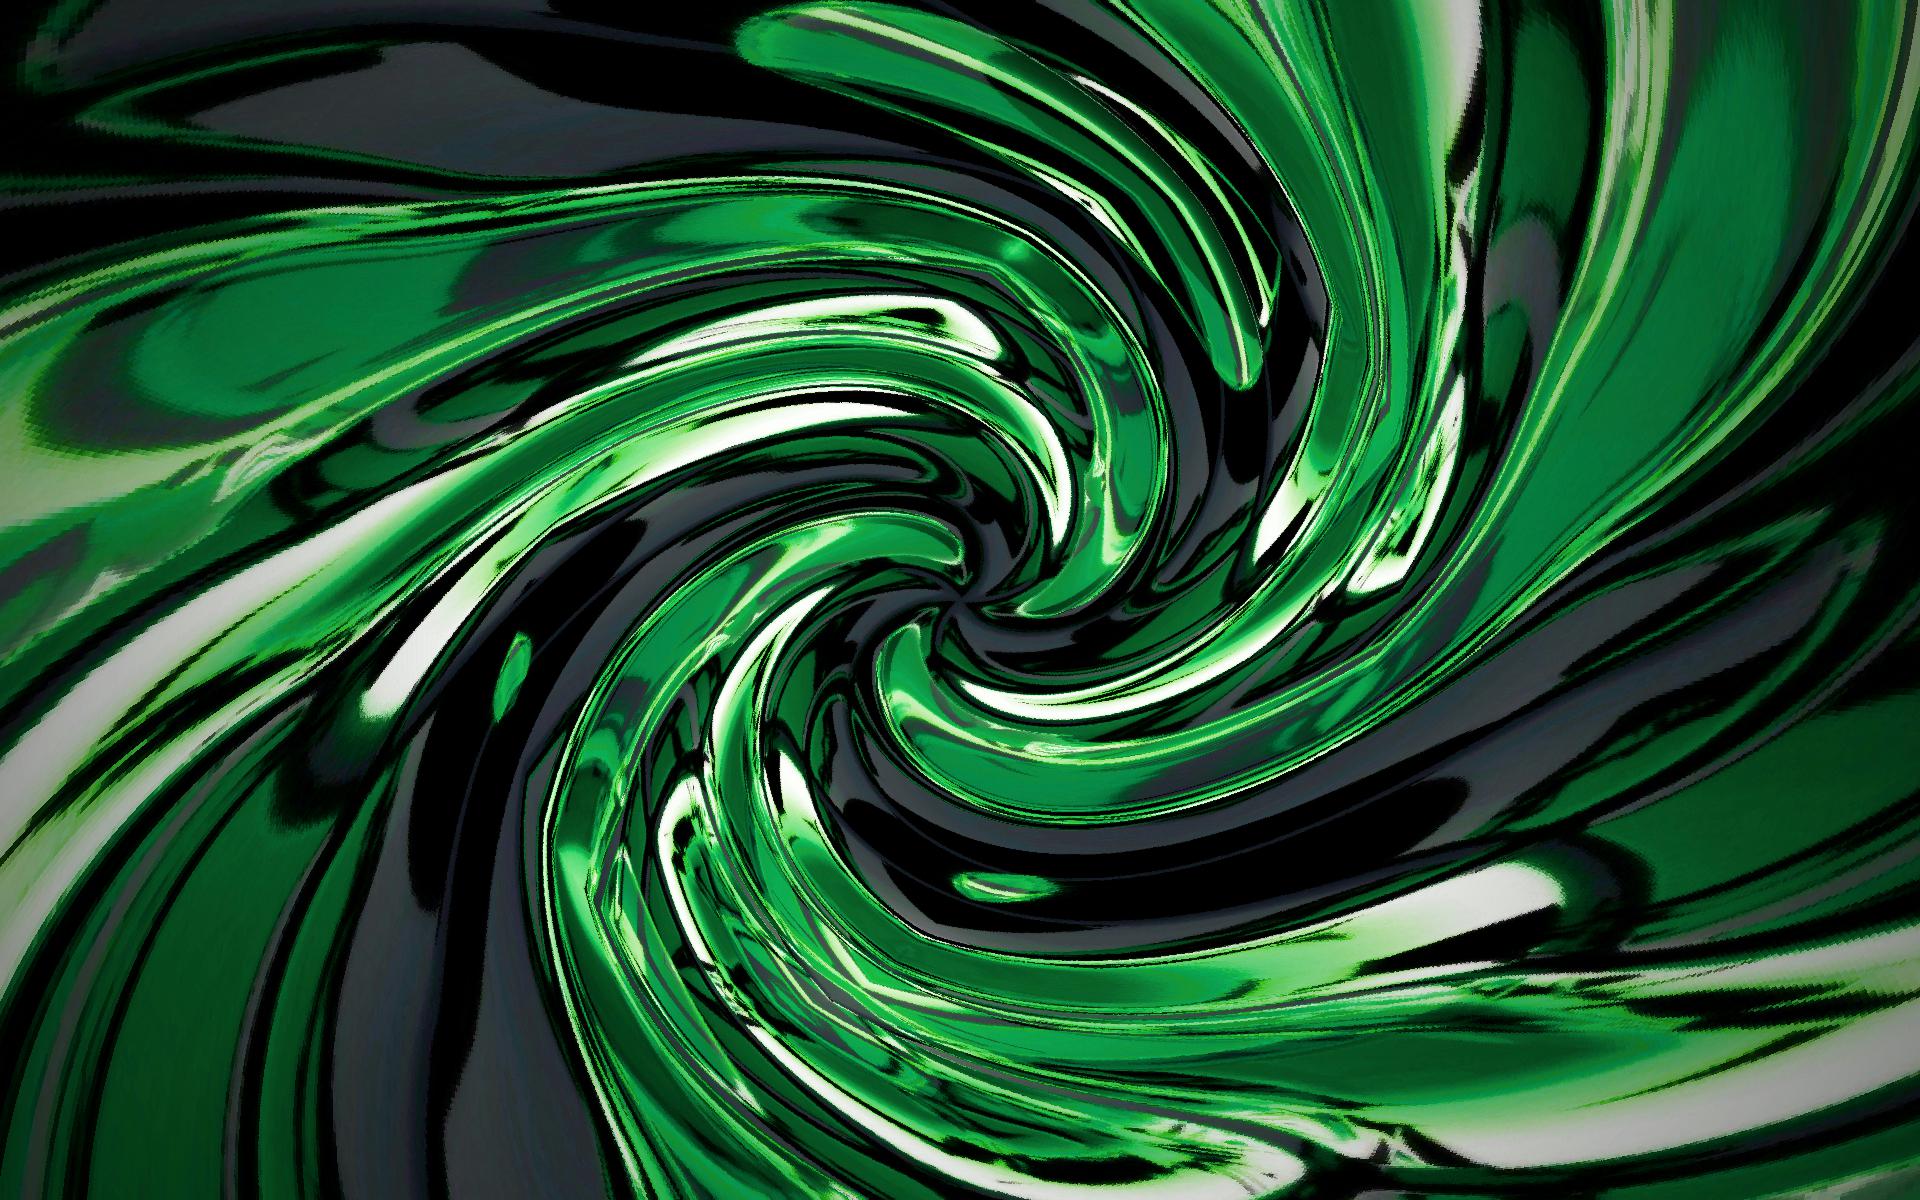 Cool Green Spin High Quality And Resolution Wallpaper